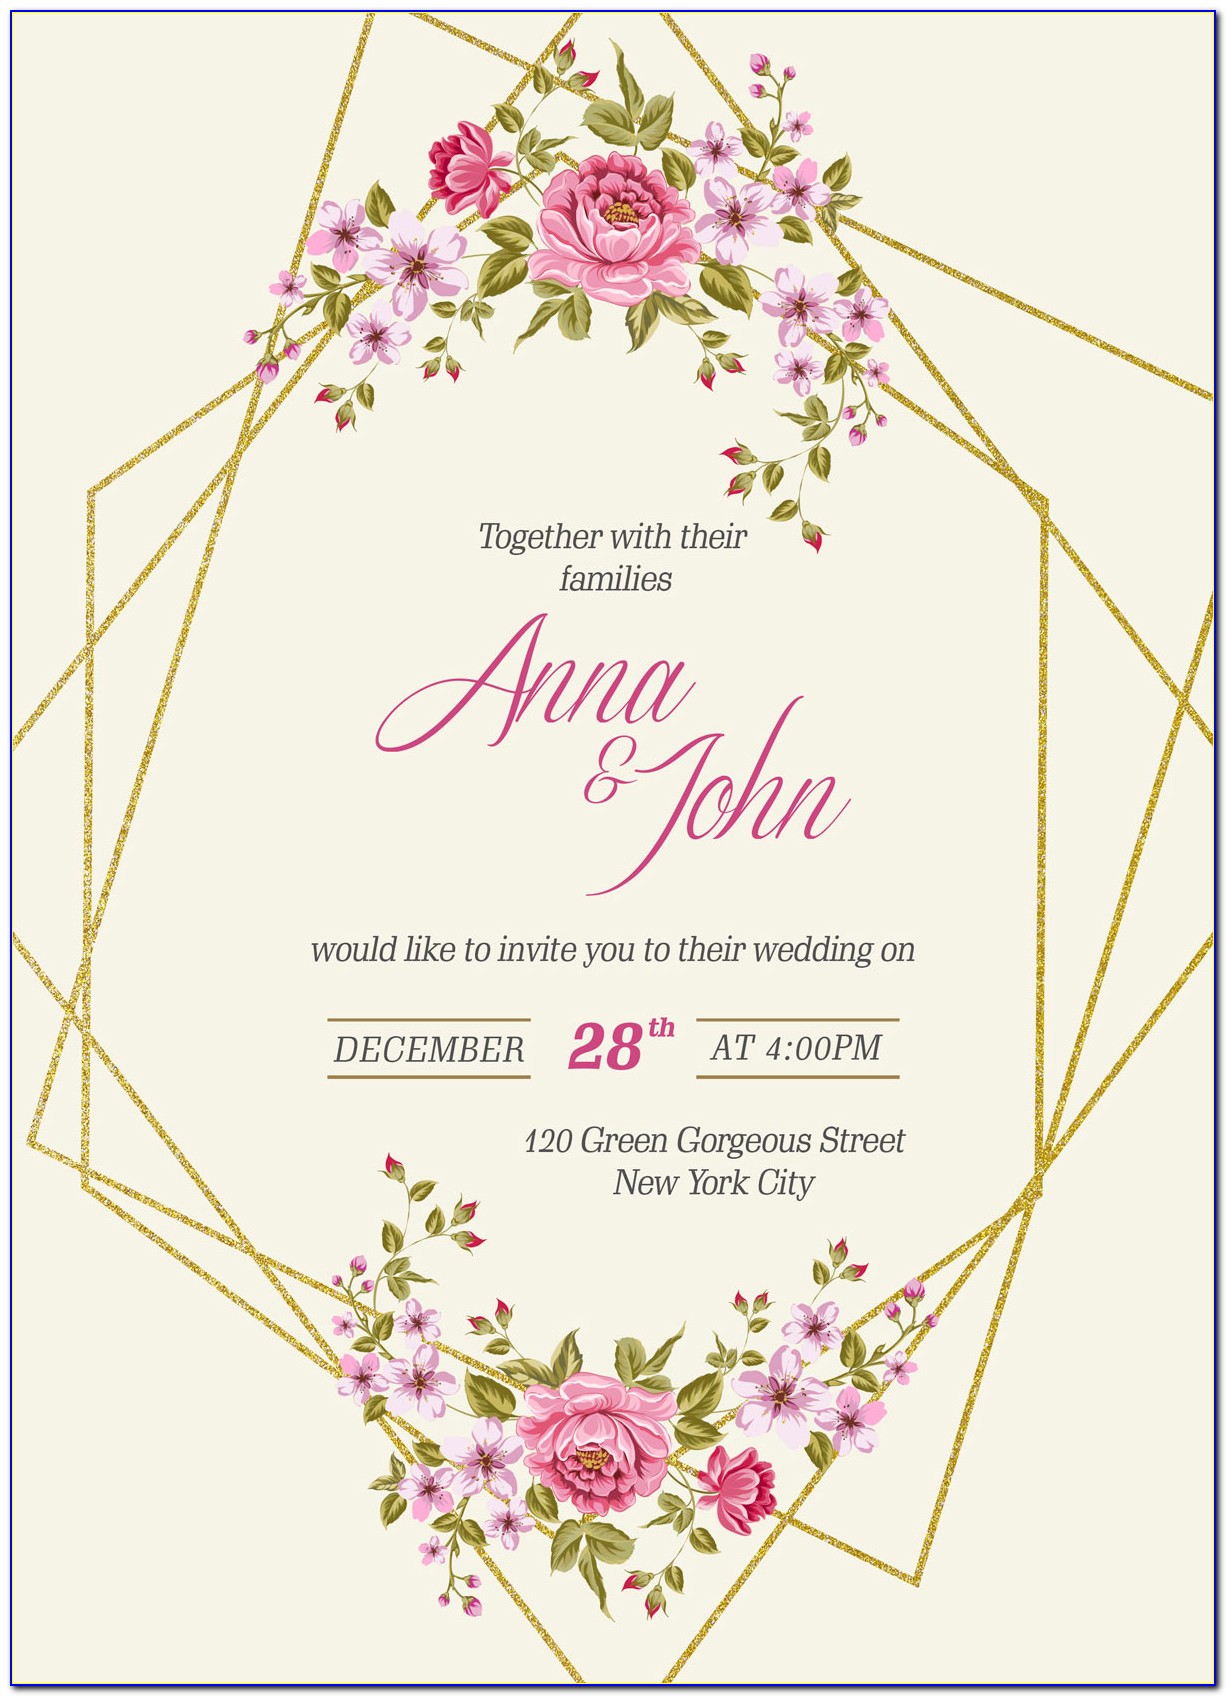 Invitation Card Psd Format Free Download